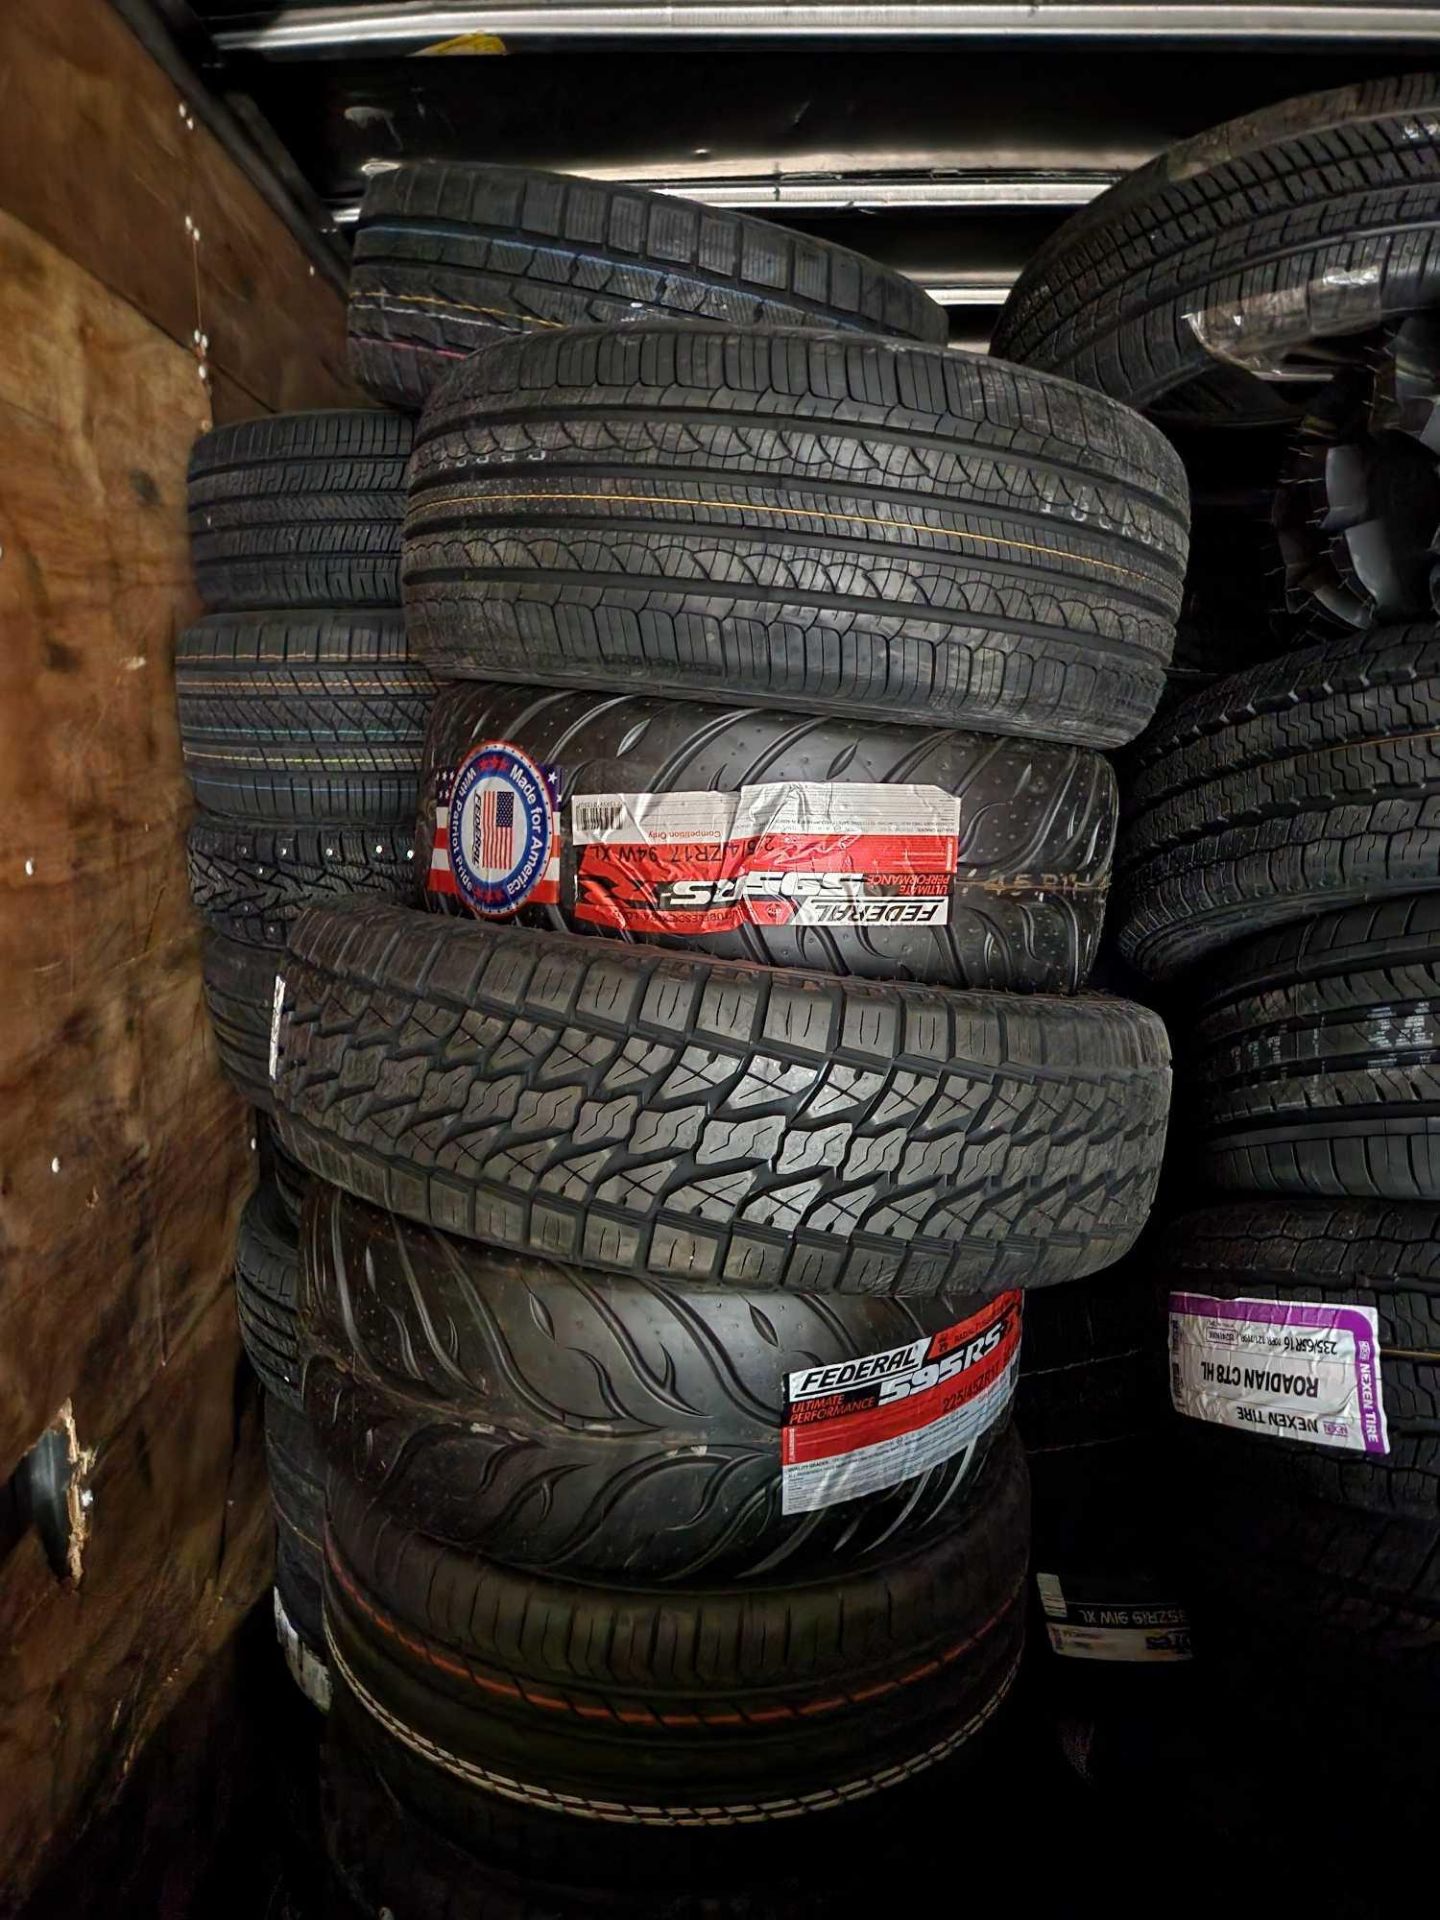 Semi Load of Tires - Image 5 of 11